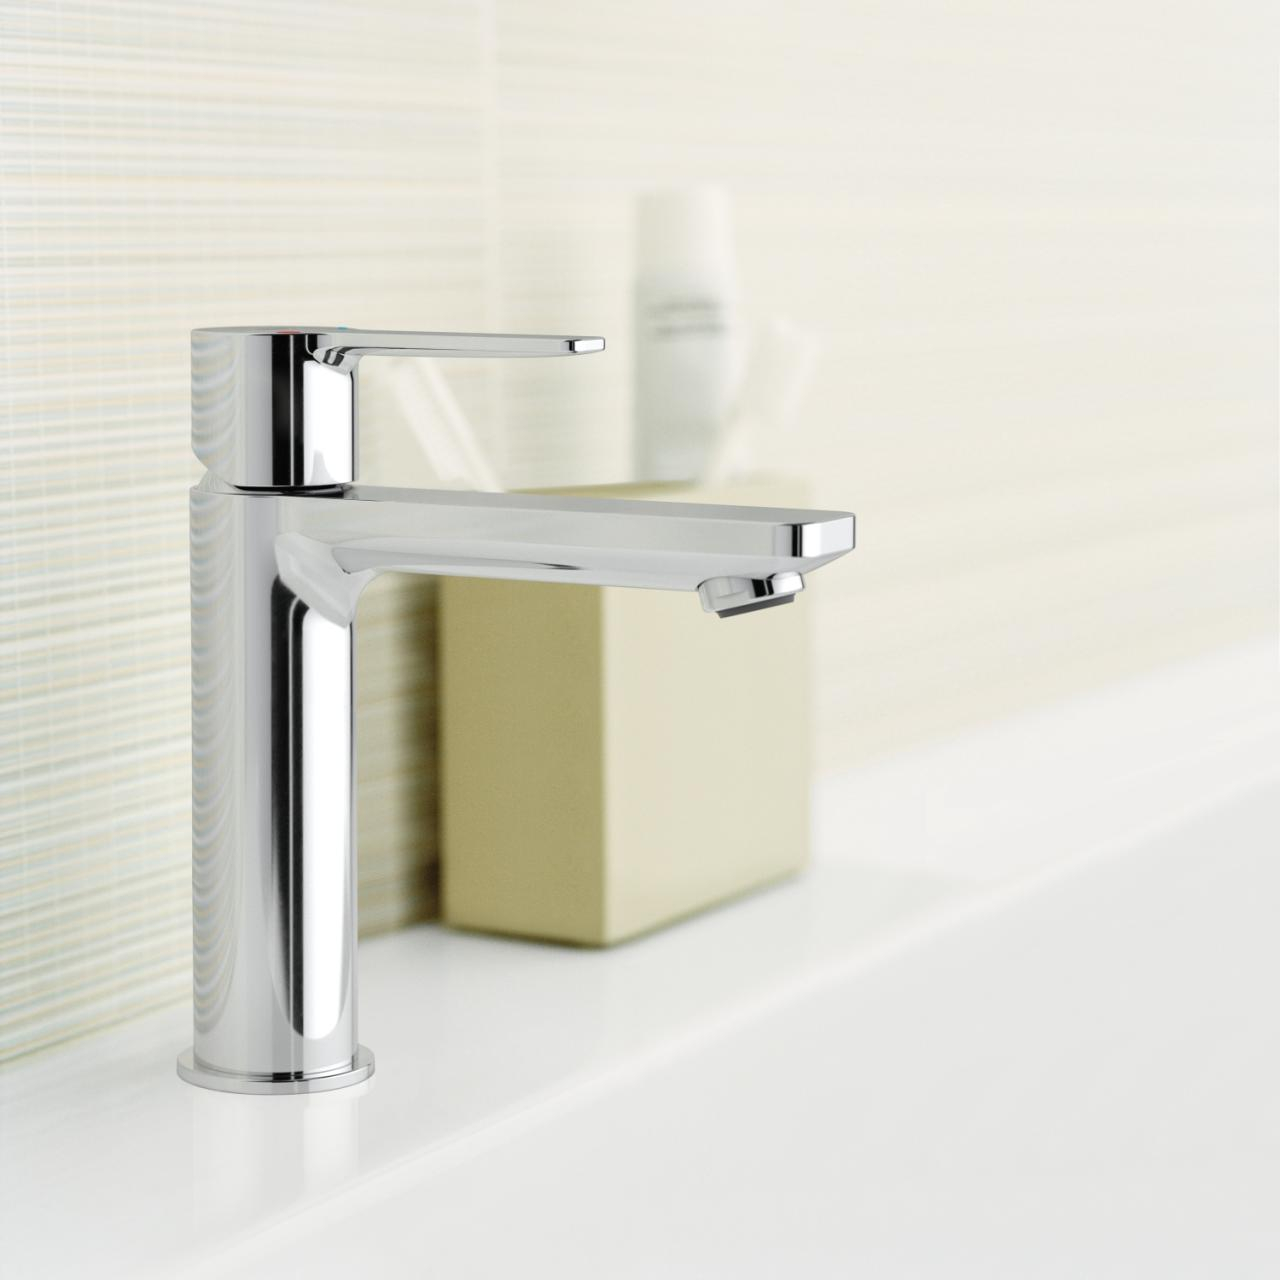 mitigeur-lavabo-lineare-bec-taille-s-chrome-32114001-grohe-0